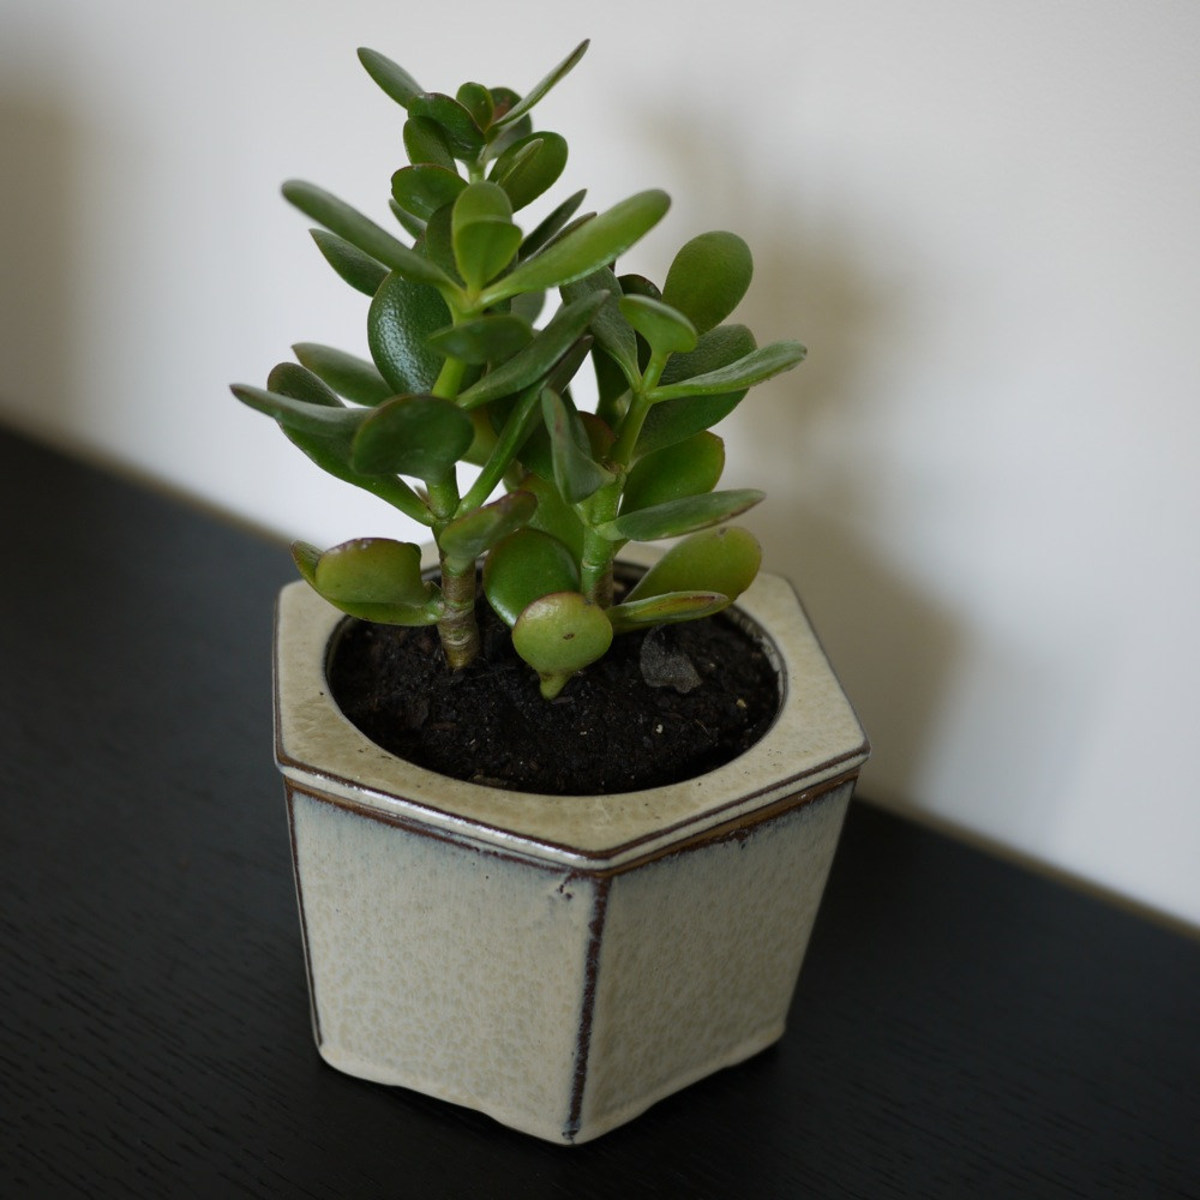 plant jade care indoor green succulent stays fantastic round year